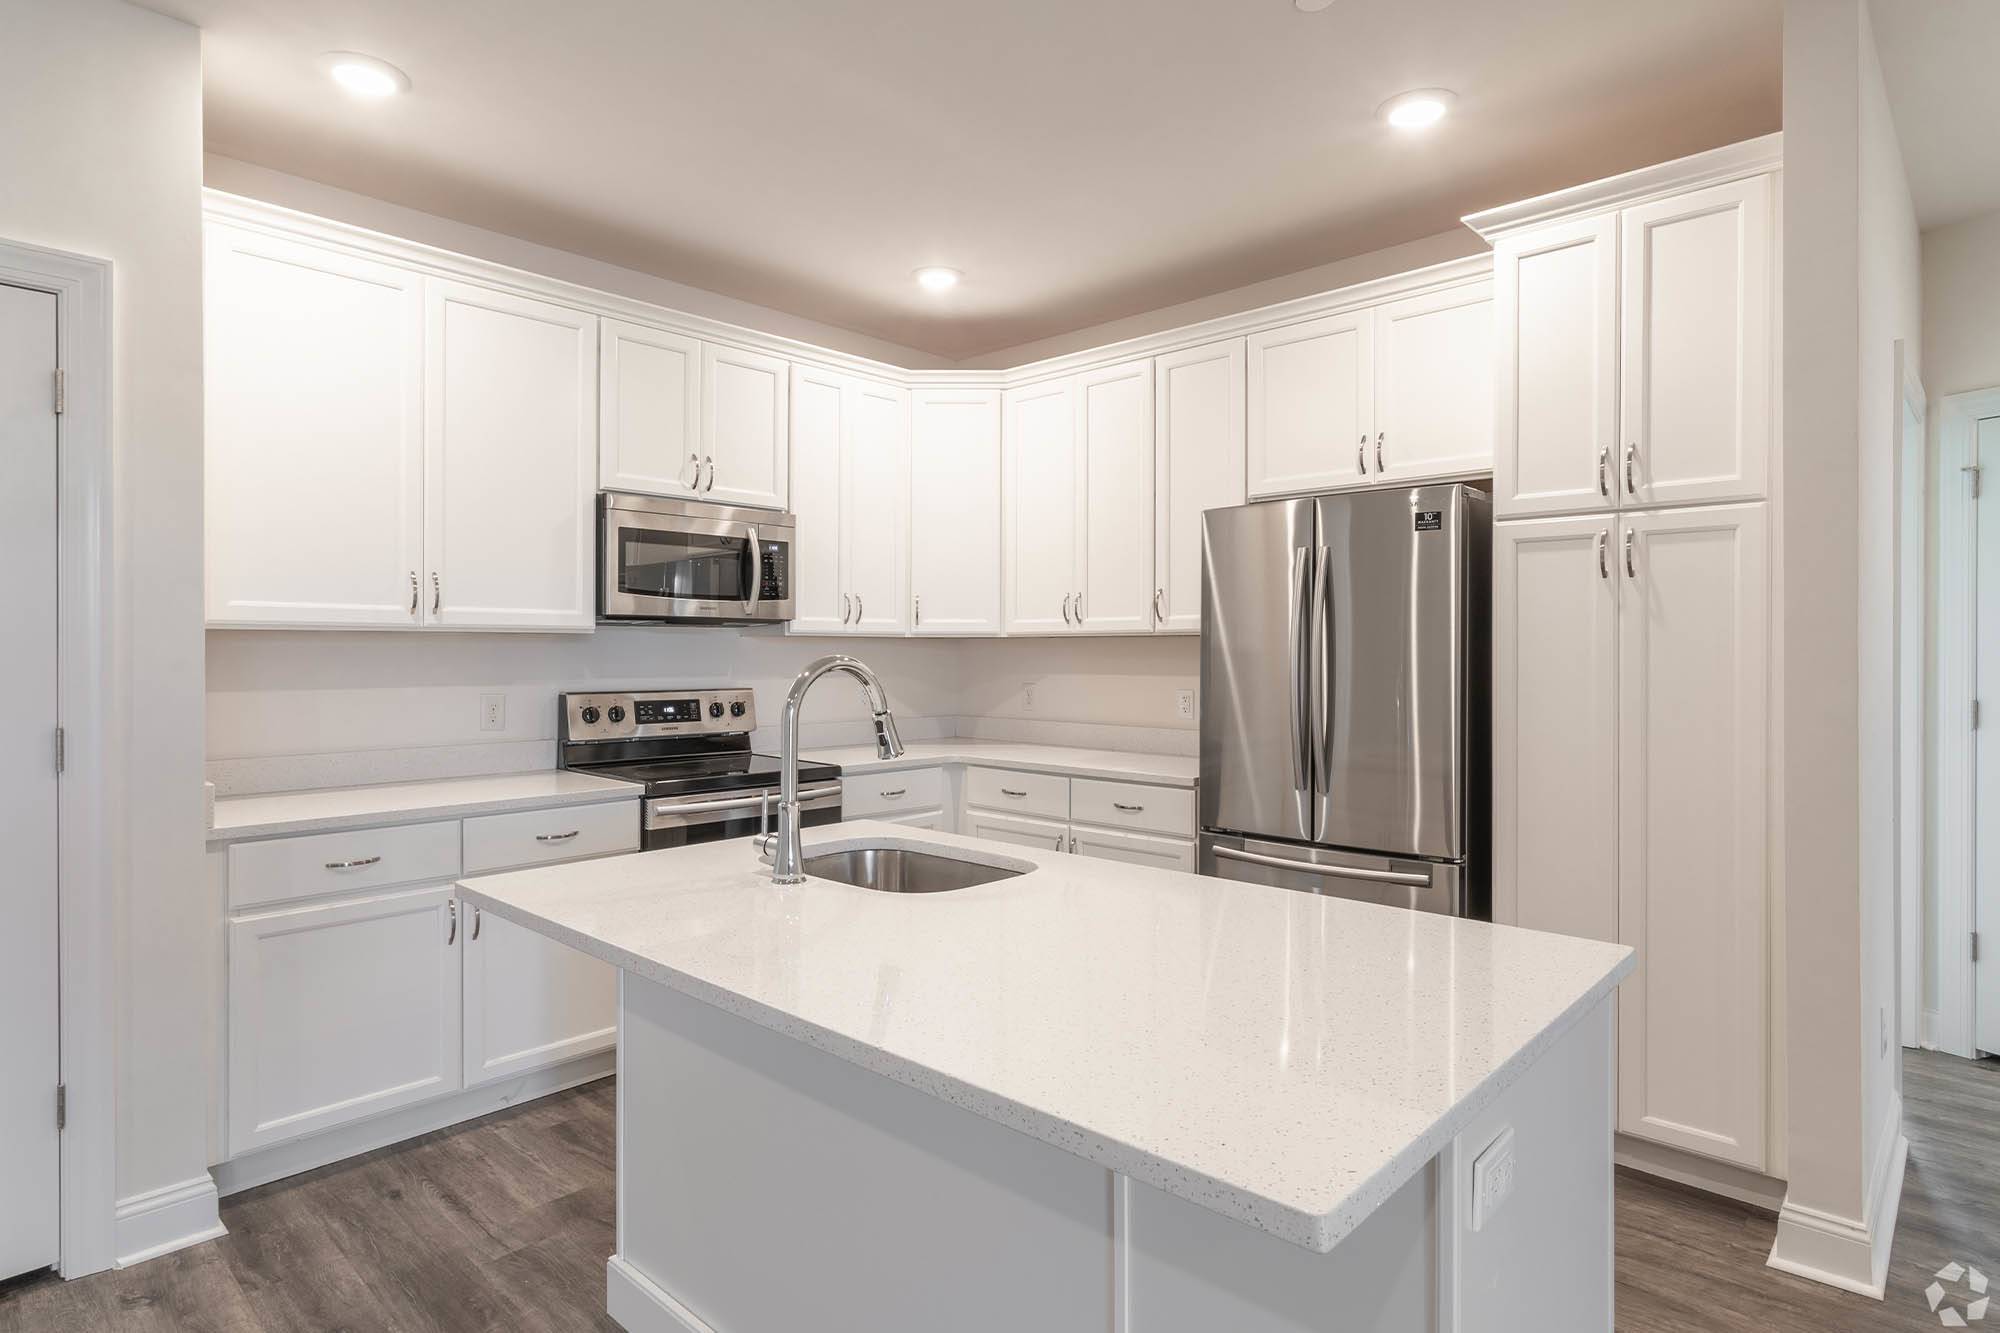 Upgraded kitchen at The Residences at St. Joseph Court in Levittown, Pennsylvania